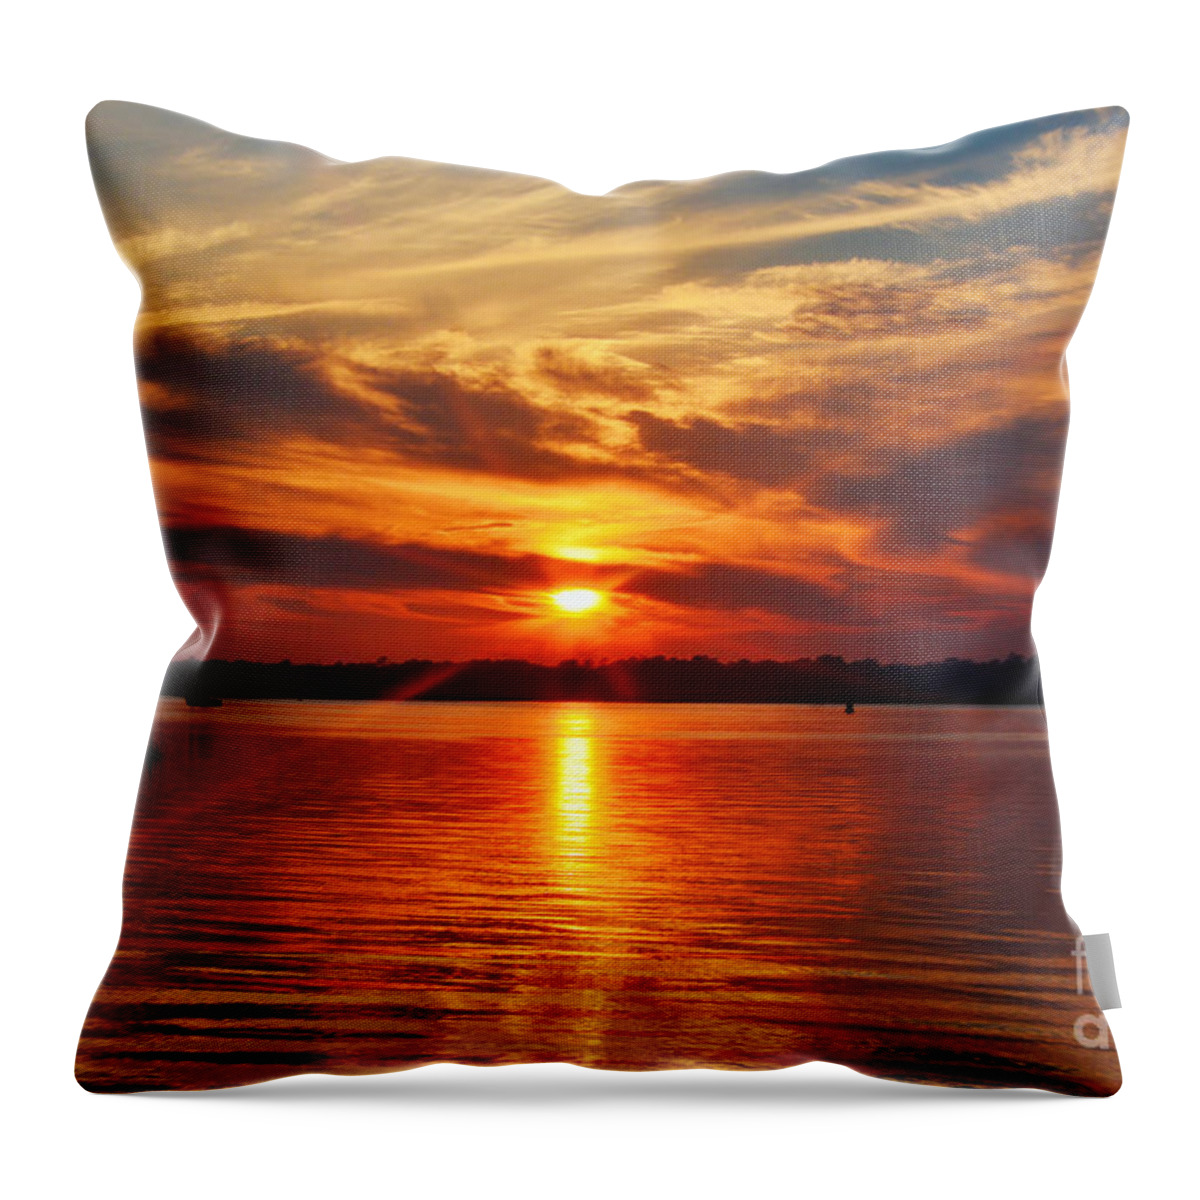 Sunset Throw Pillow featuring the photograph Firey Sunset by Kathy Baccari